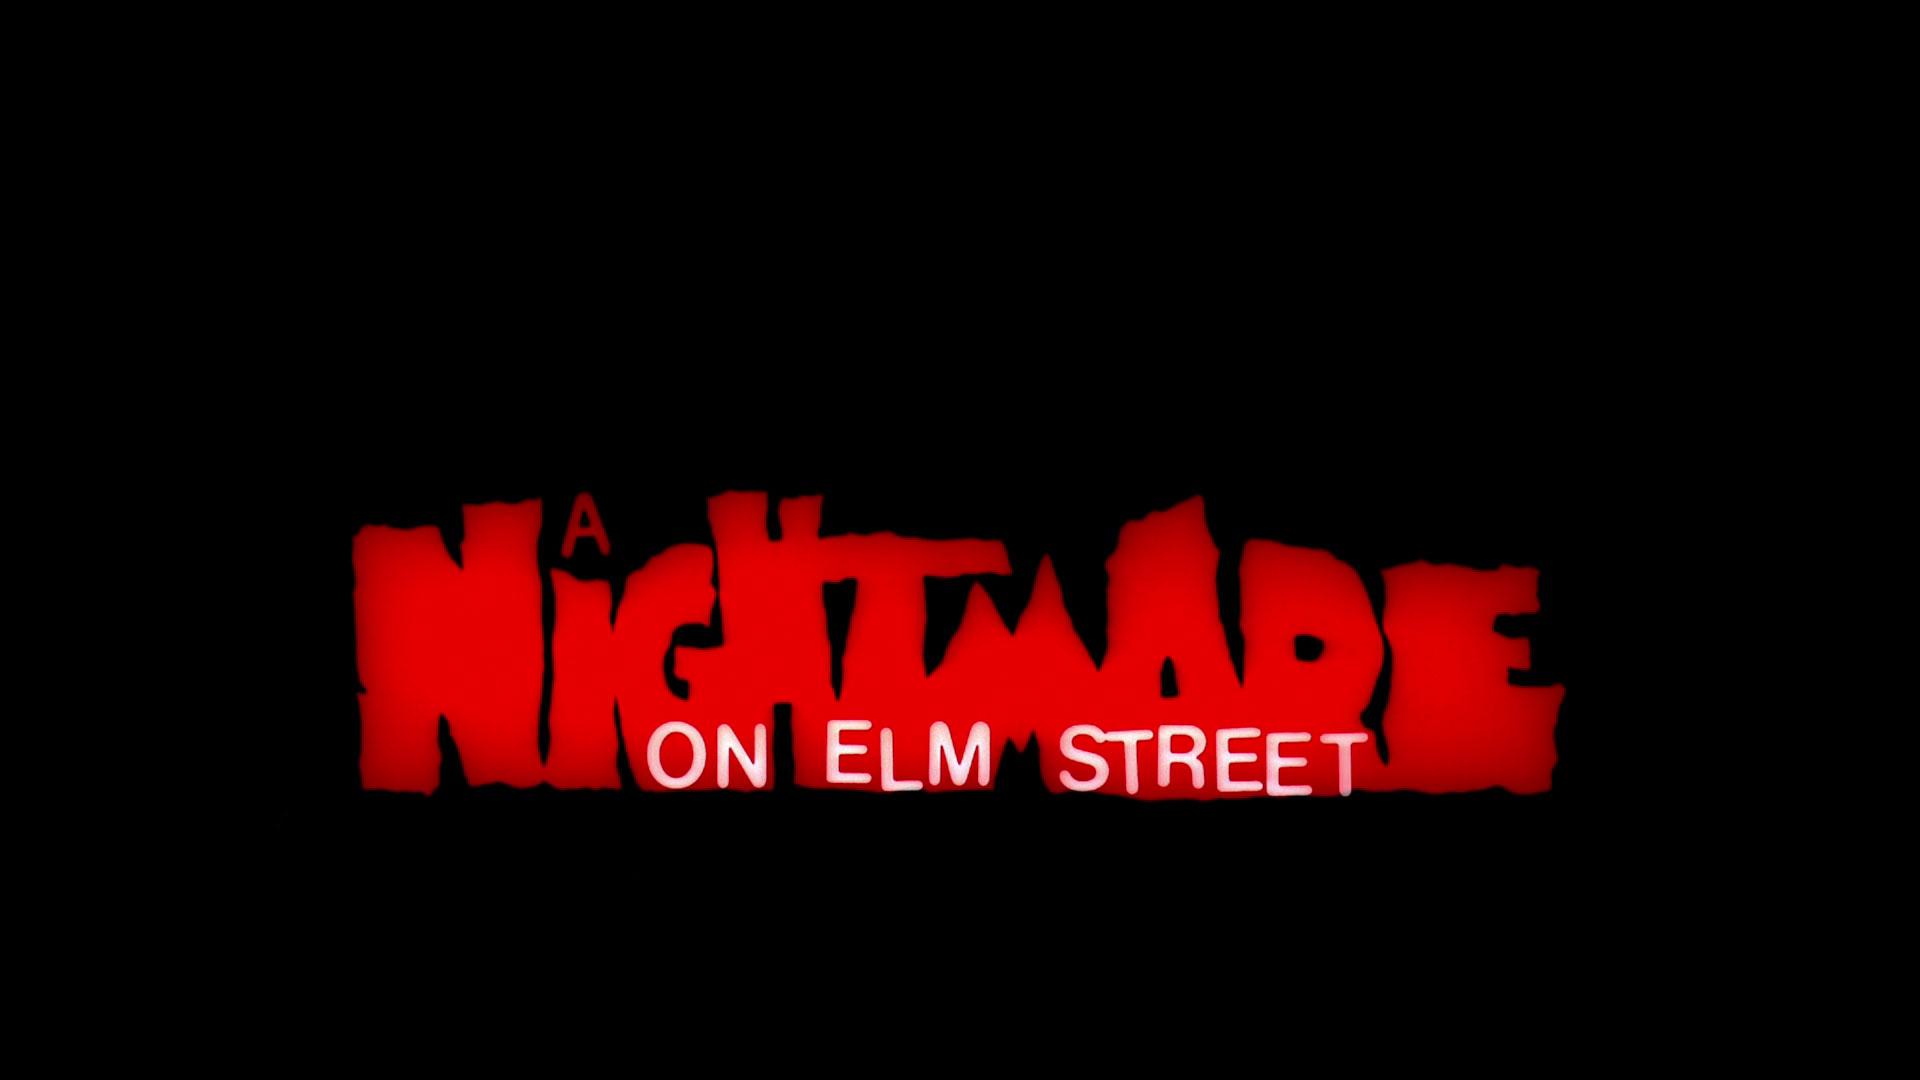 A Nightmare on Elm Street (1984) Wallpaper and Background Image